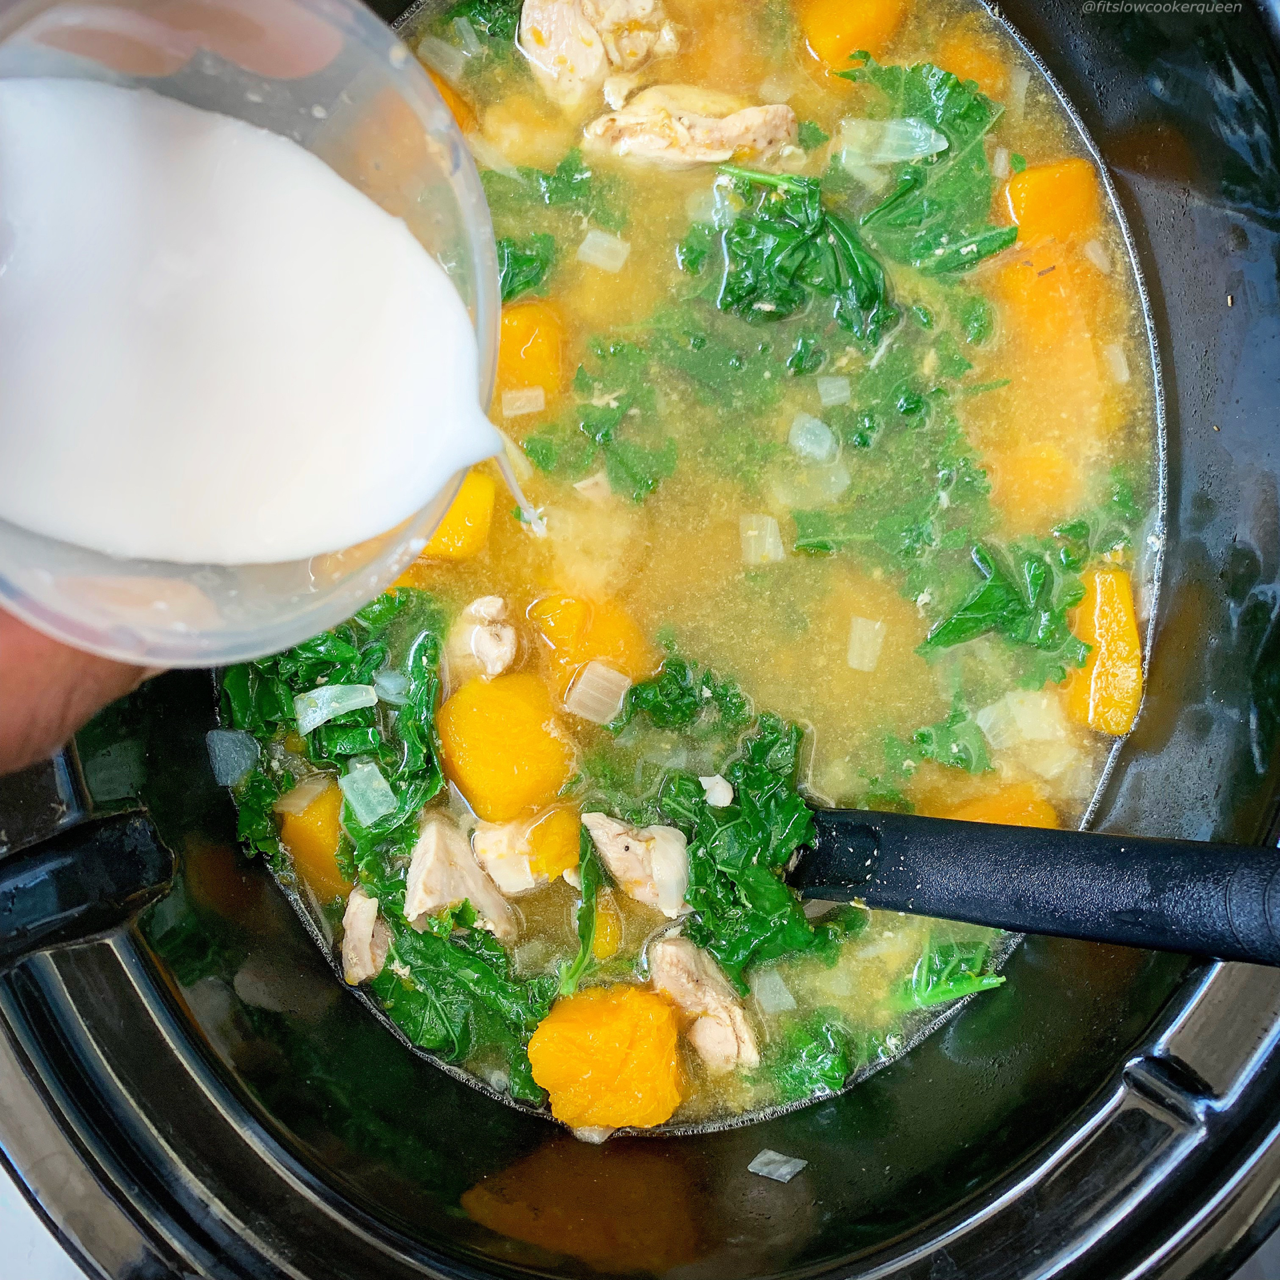 Chicken, butternut squash, and kale cook together in this easy paleo and whole30 compliant recipe. This soup can be made in your slow cooker or Instant Pot.